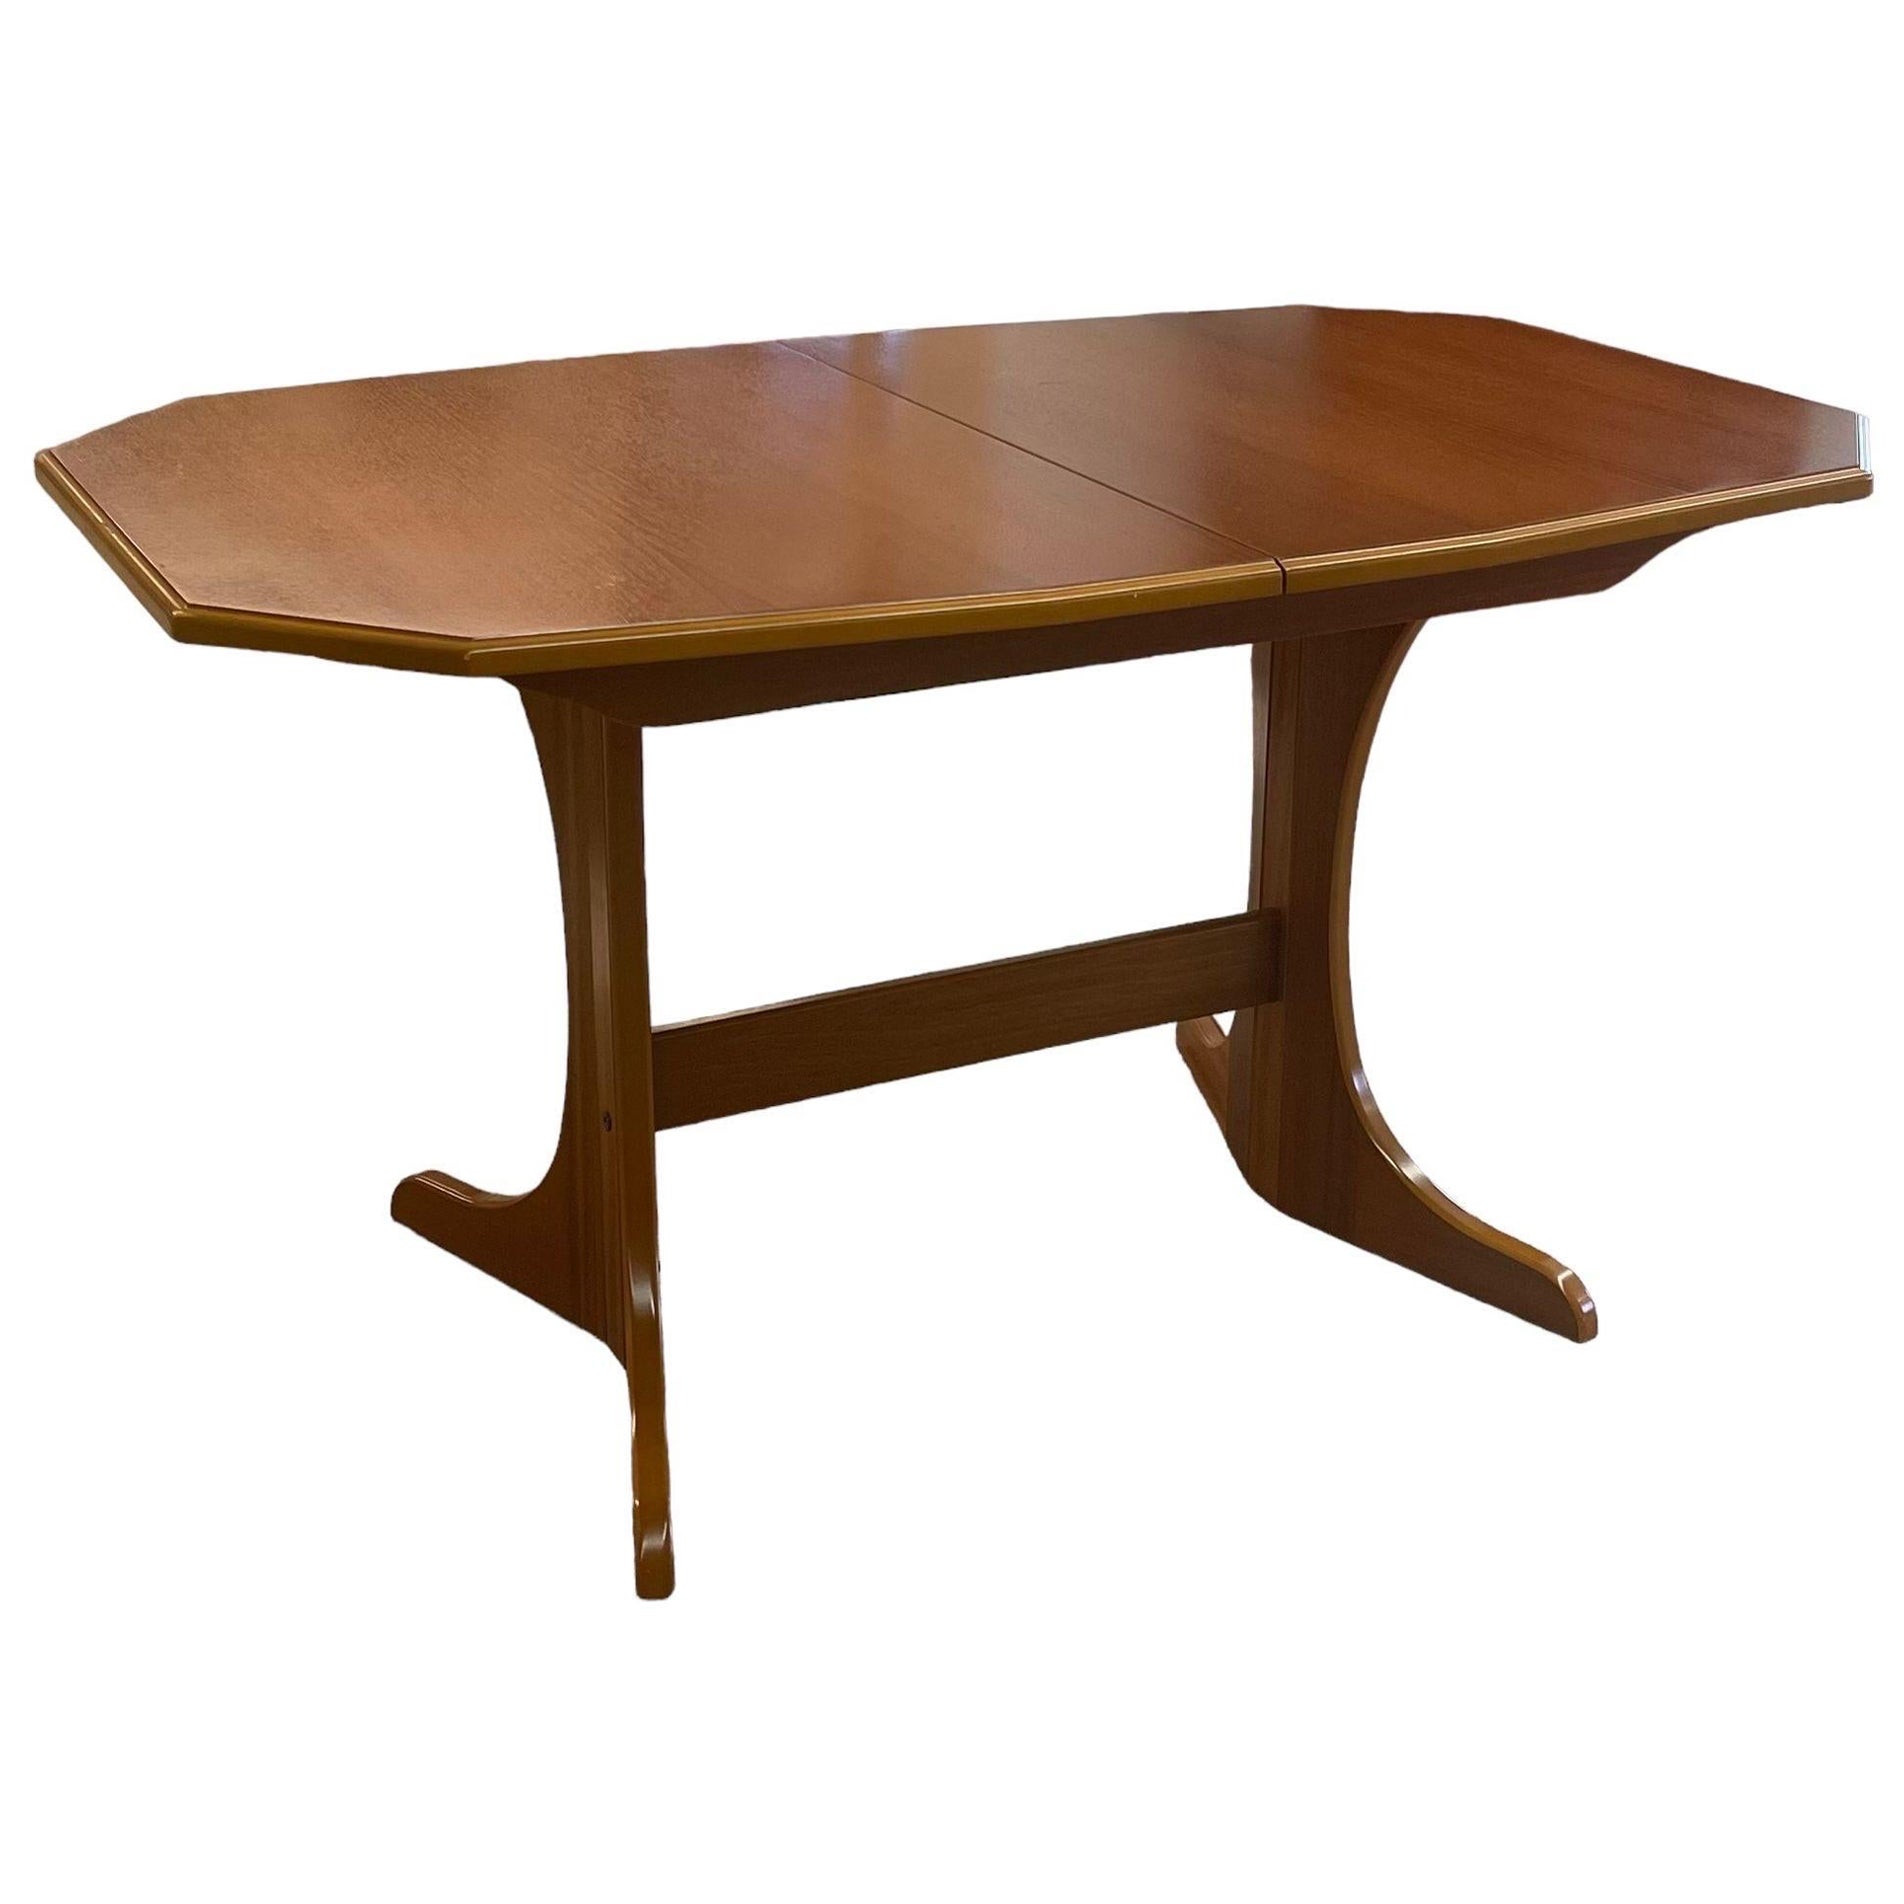 Vintage Mid Century Modern Dining Table With Butterfly Leaf Insert For Sale